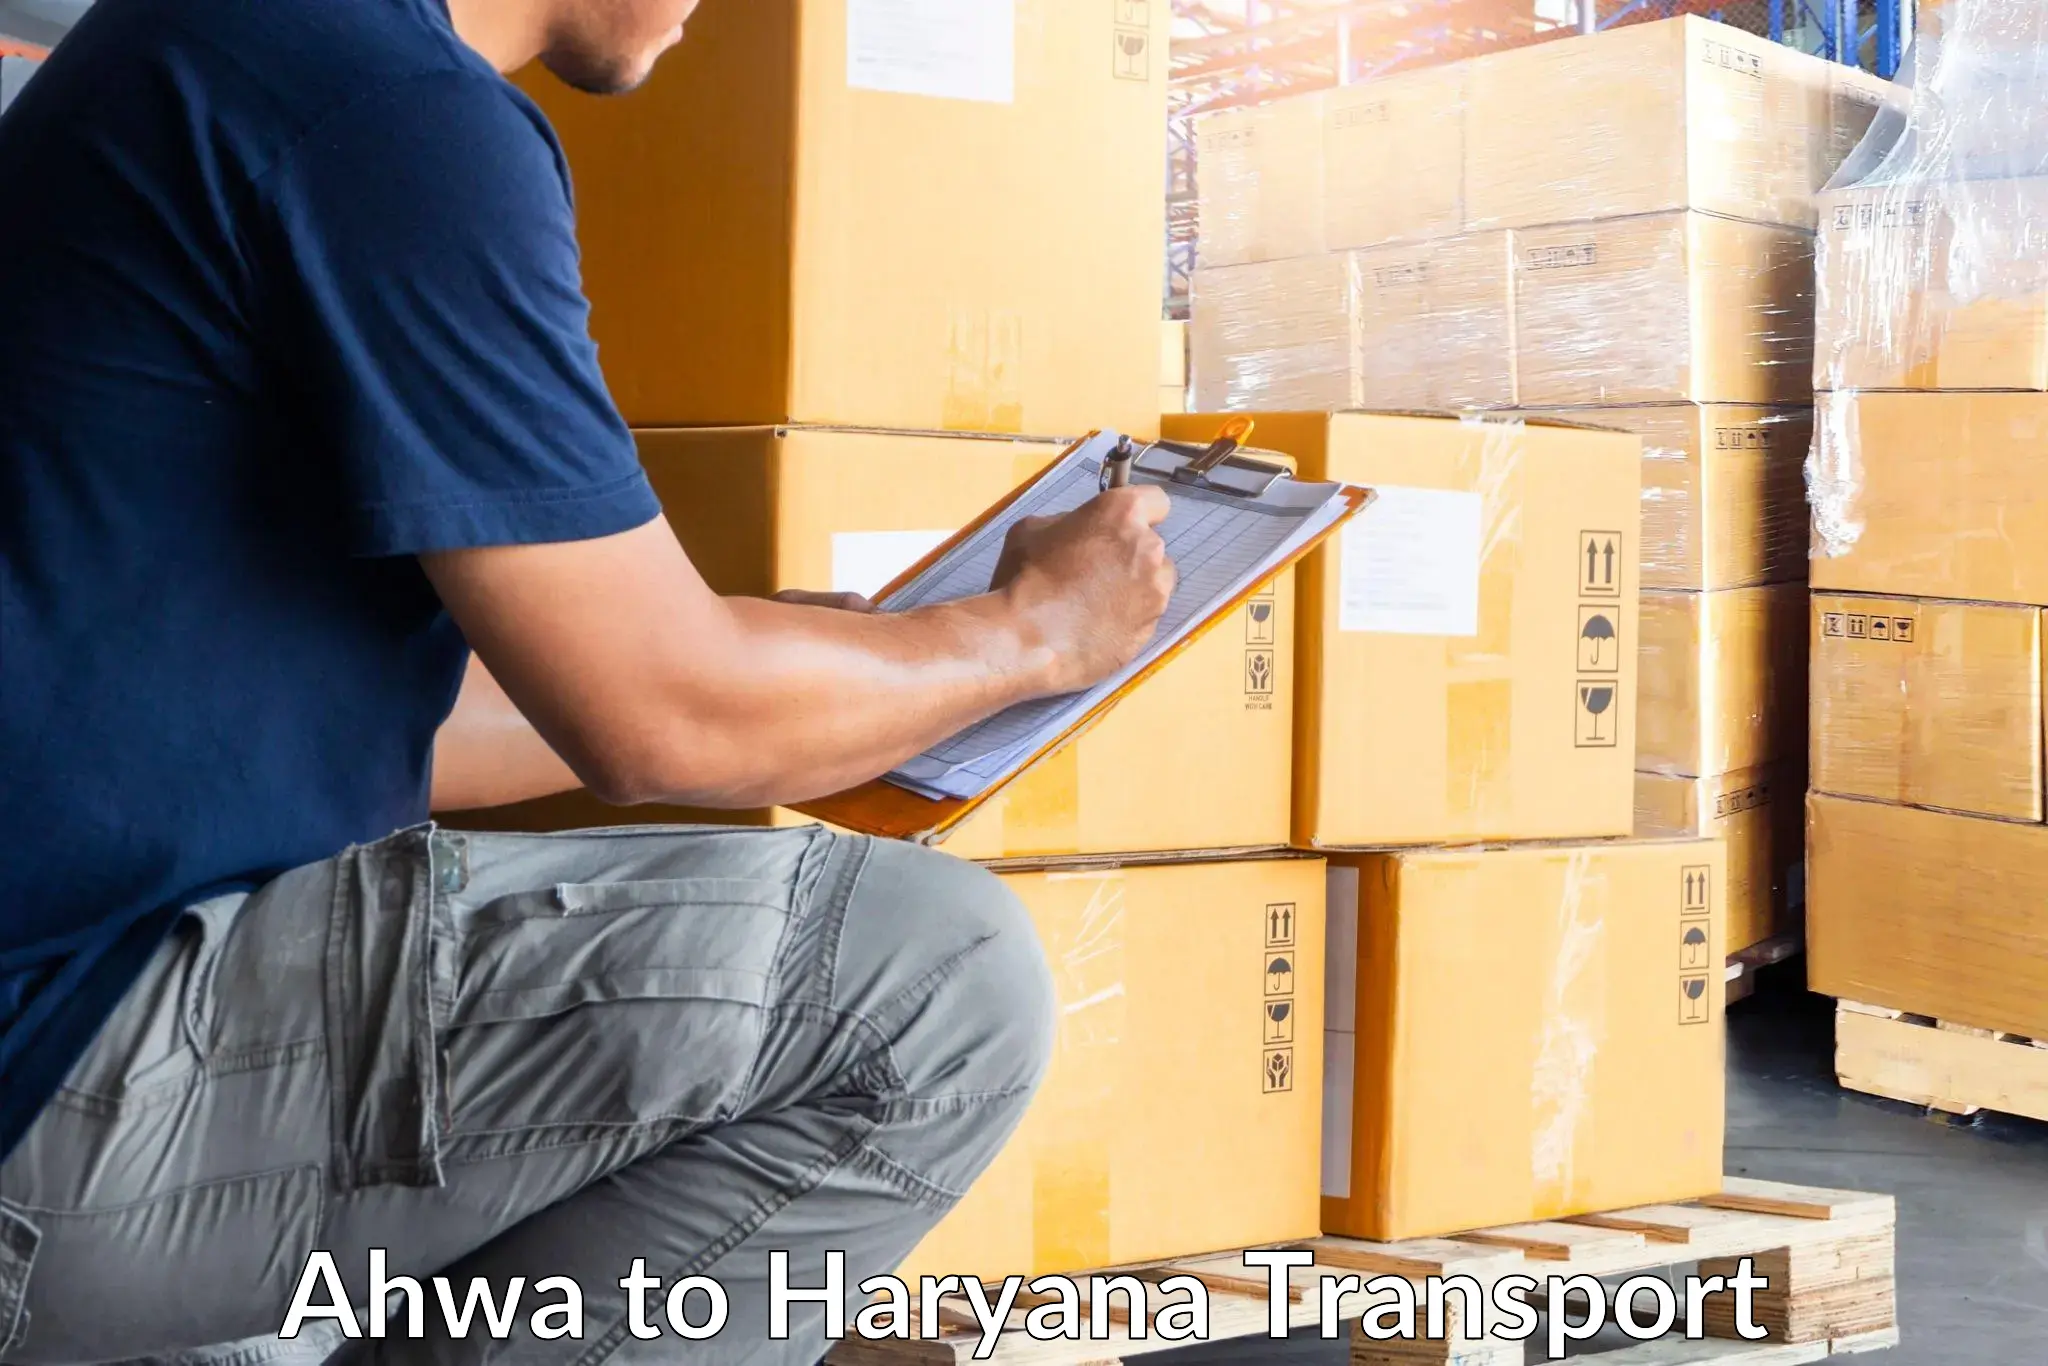 Container transport service Ahwa to Haryana